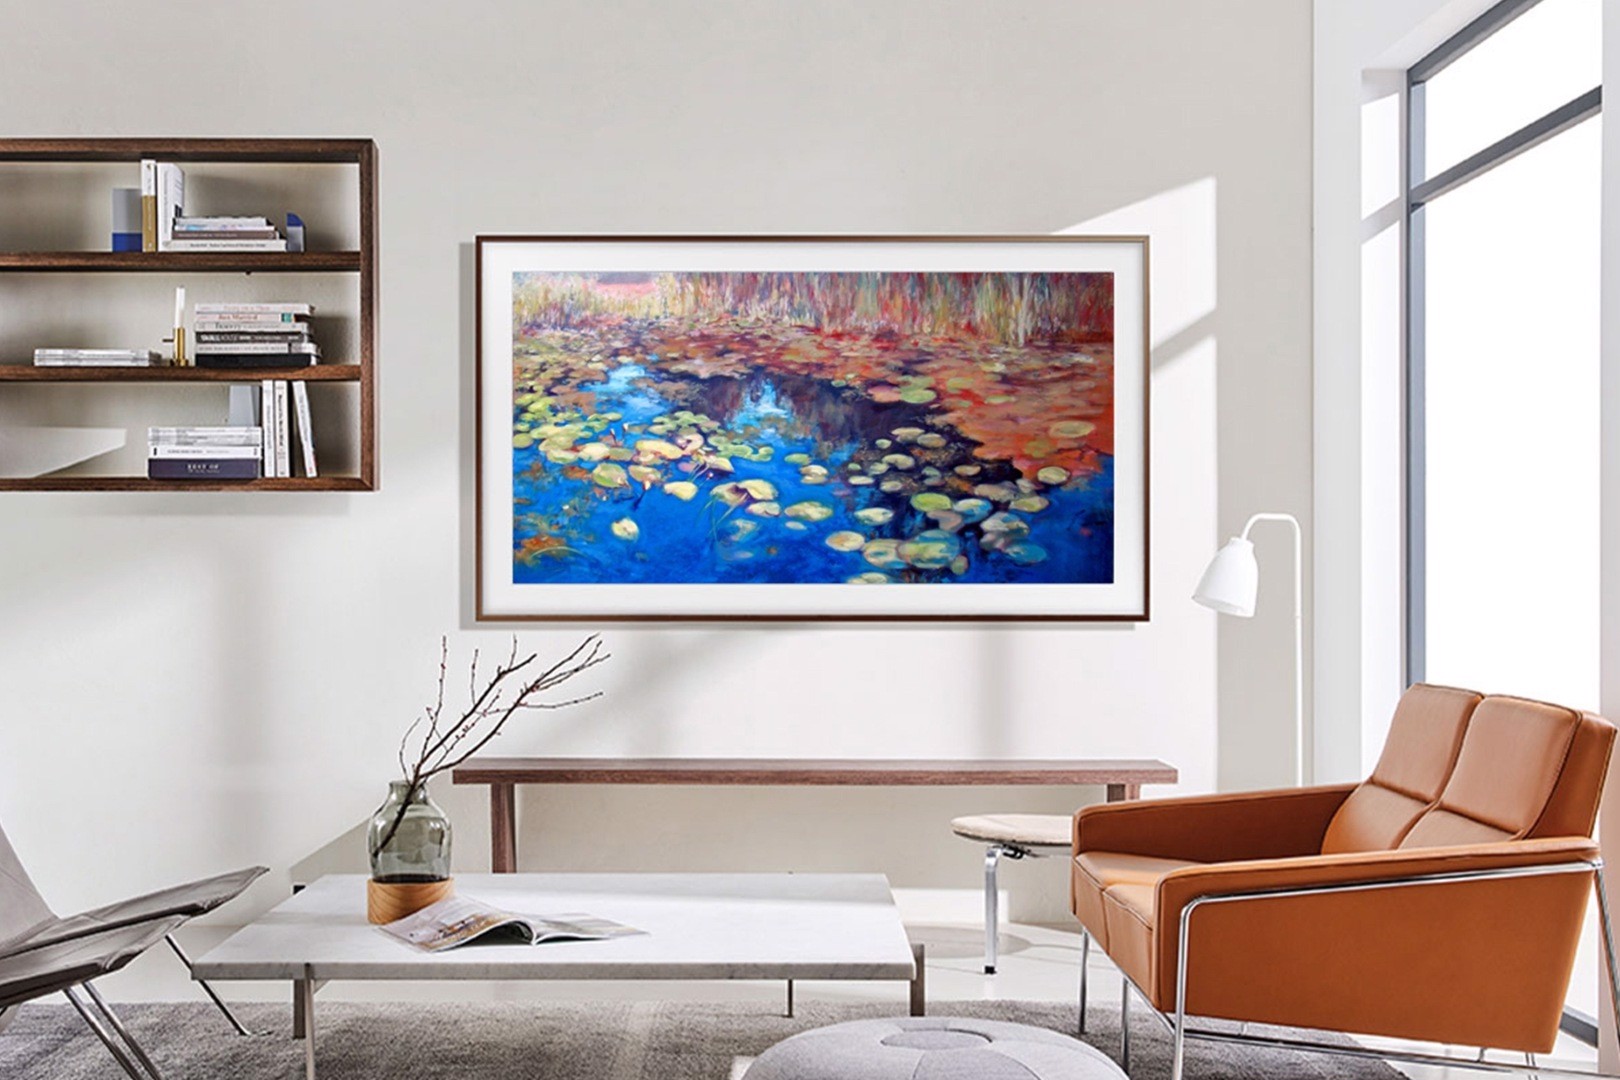 Samsung The Frame: TV as Art in Your Home